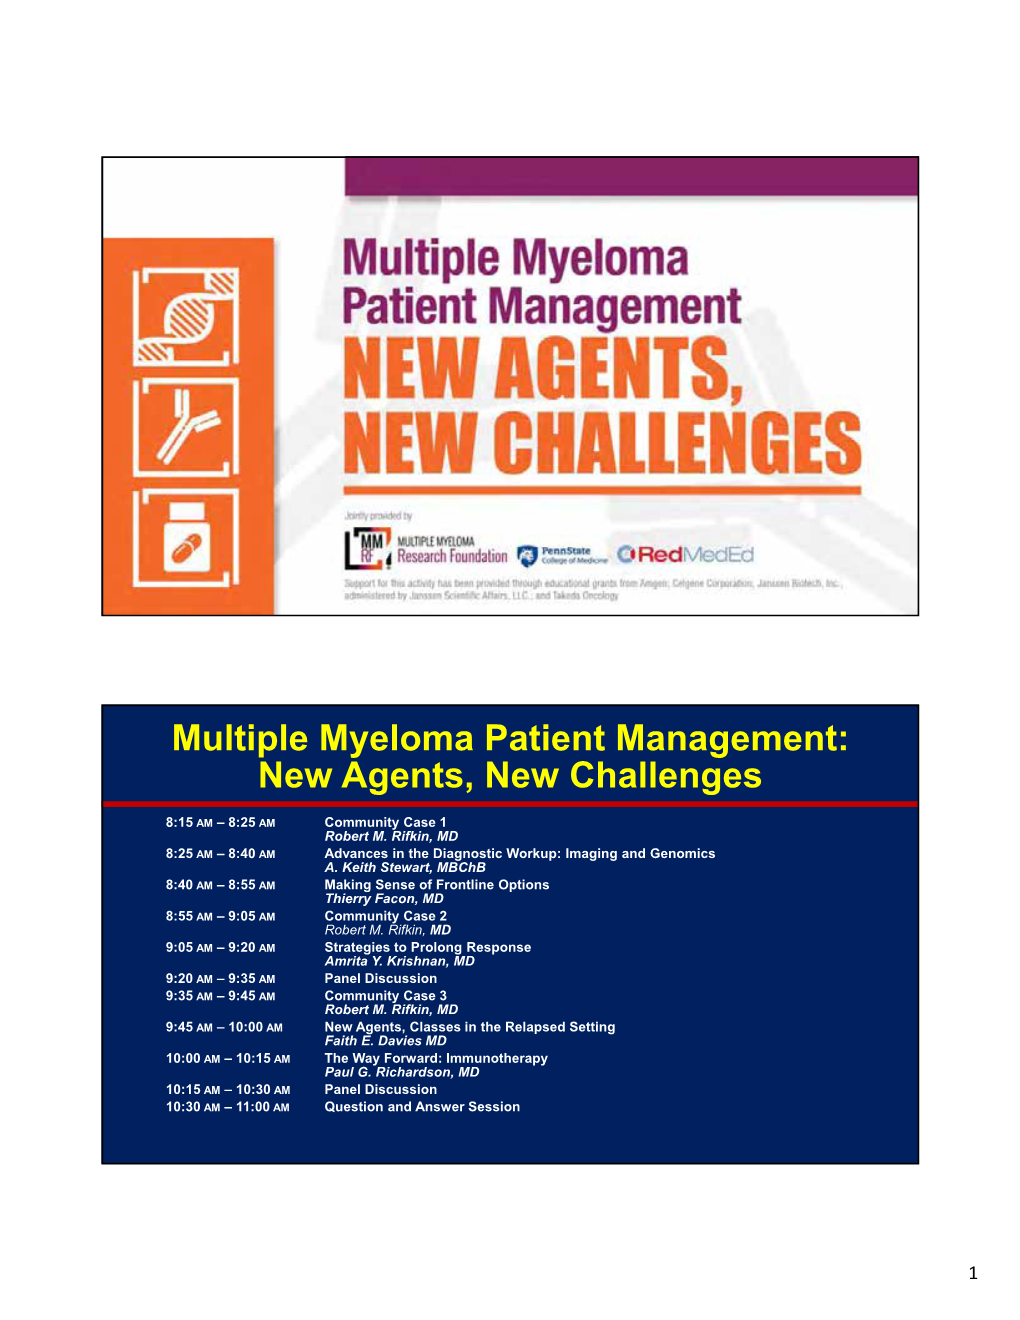 Multiple Myeloma Patient Management: New Agents, New Challenges